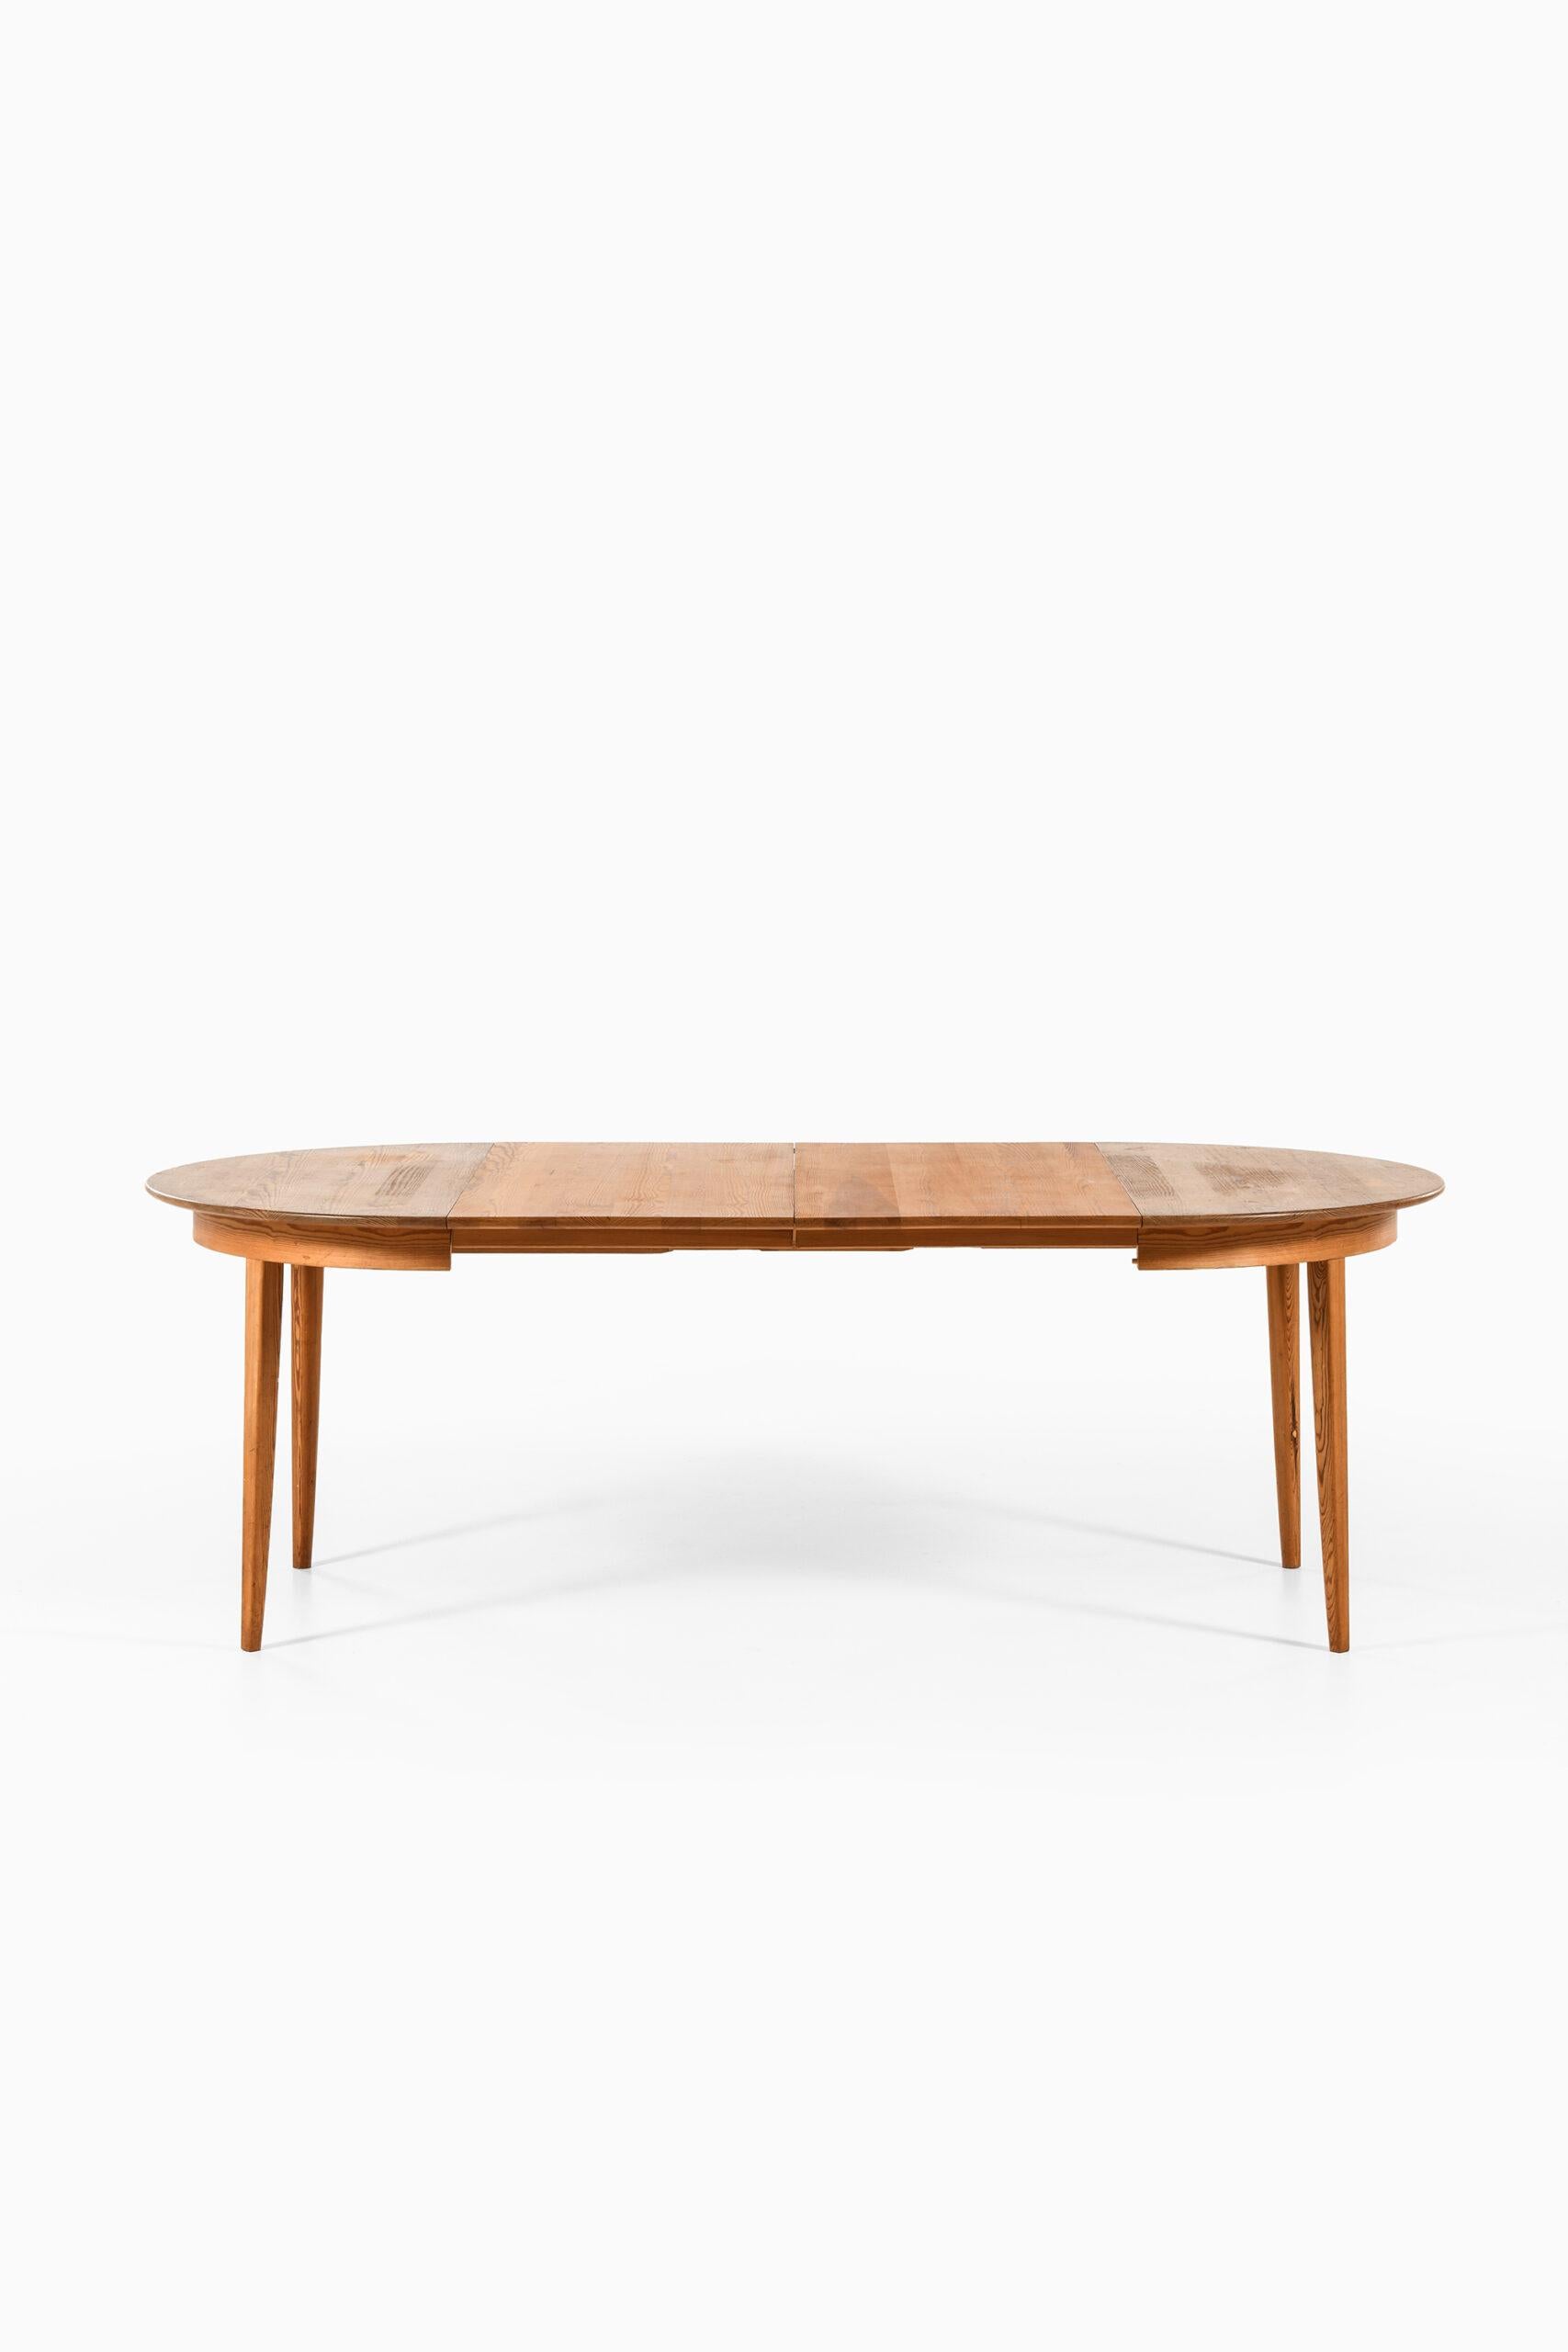 Carl Malmsten Dining Table Produced in Sweden 1